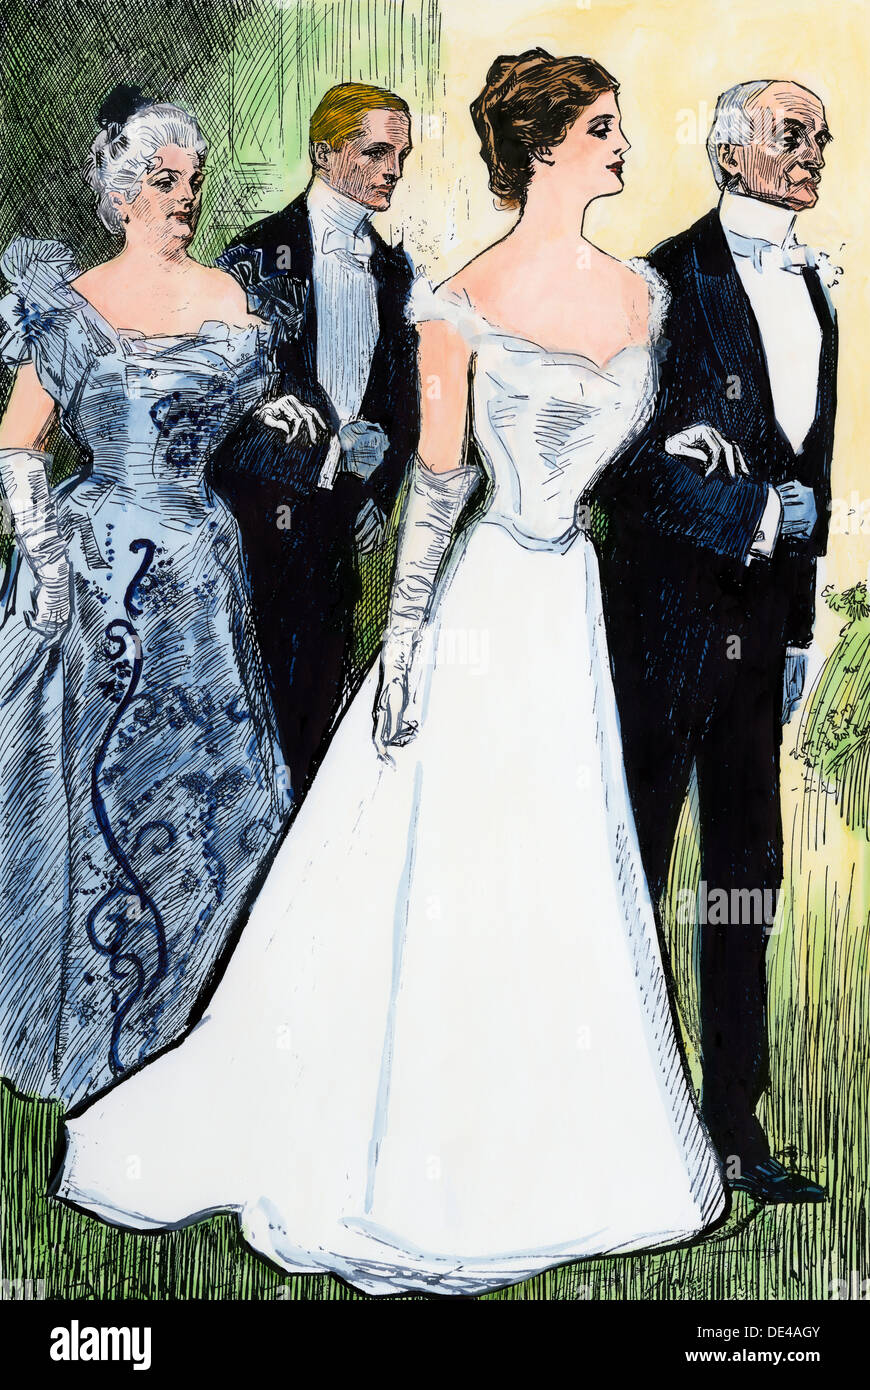 Debutante escorted by her father at her debut, circa 1900. Hand-colored woodcut of a Charles Dana Gibson illustration Stock Photo